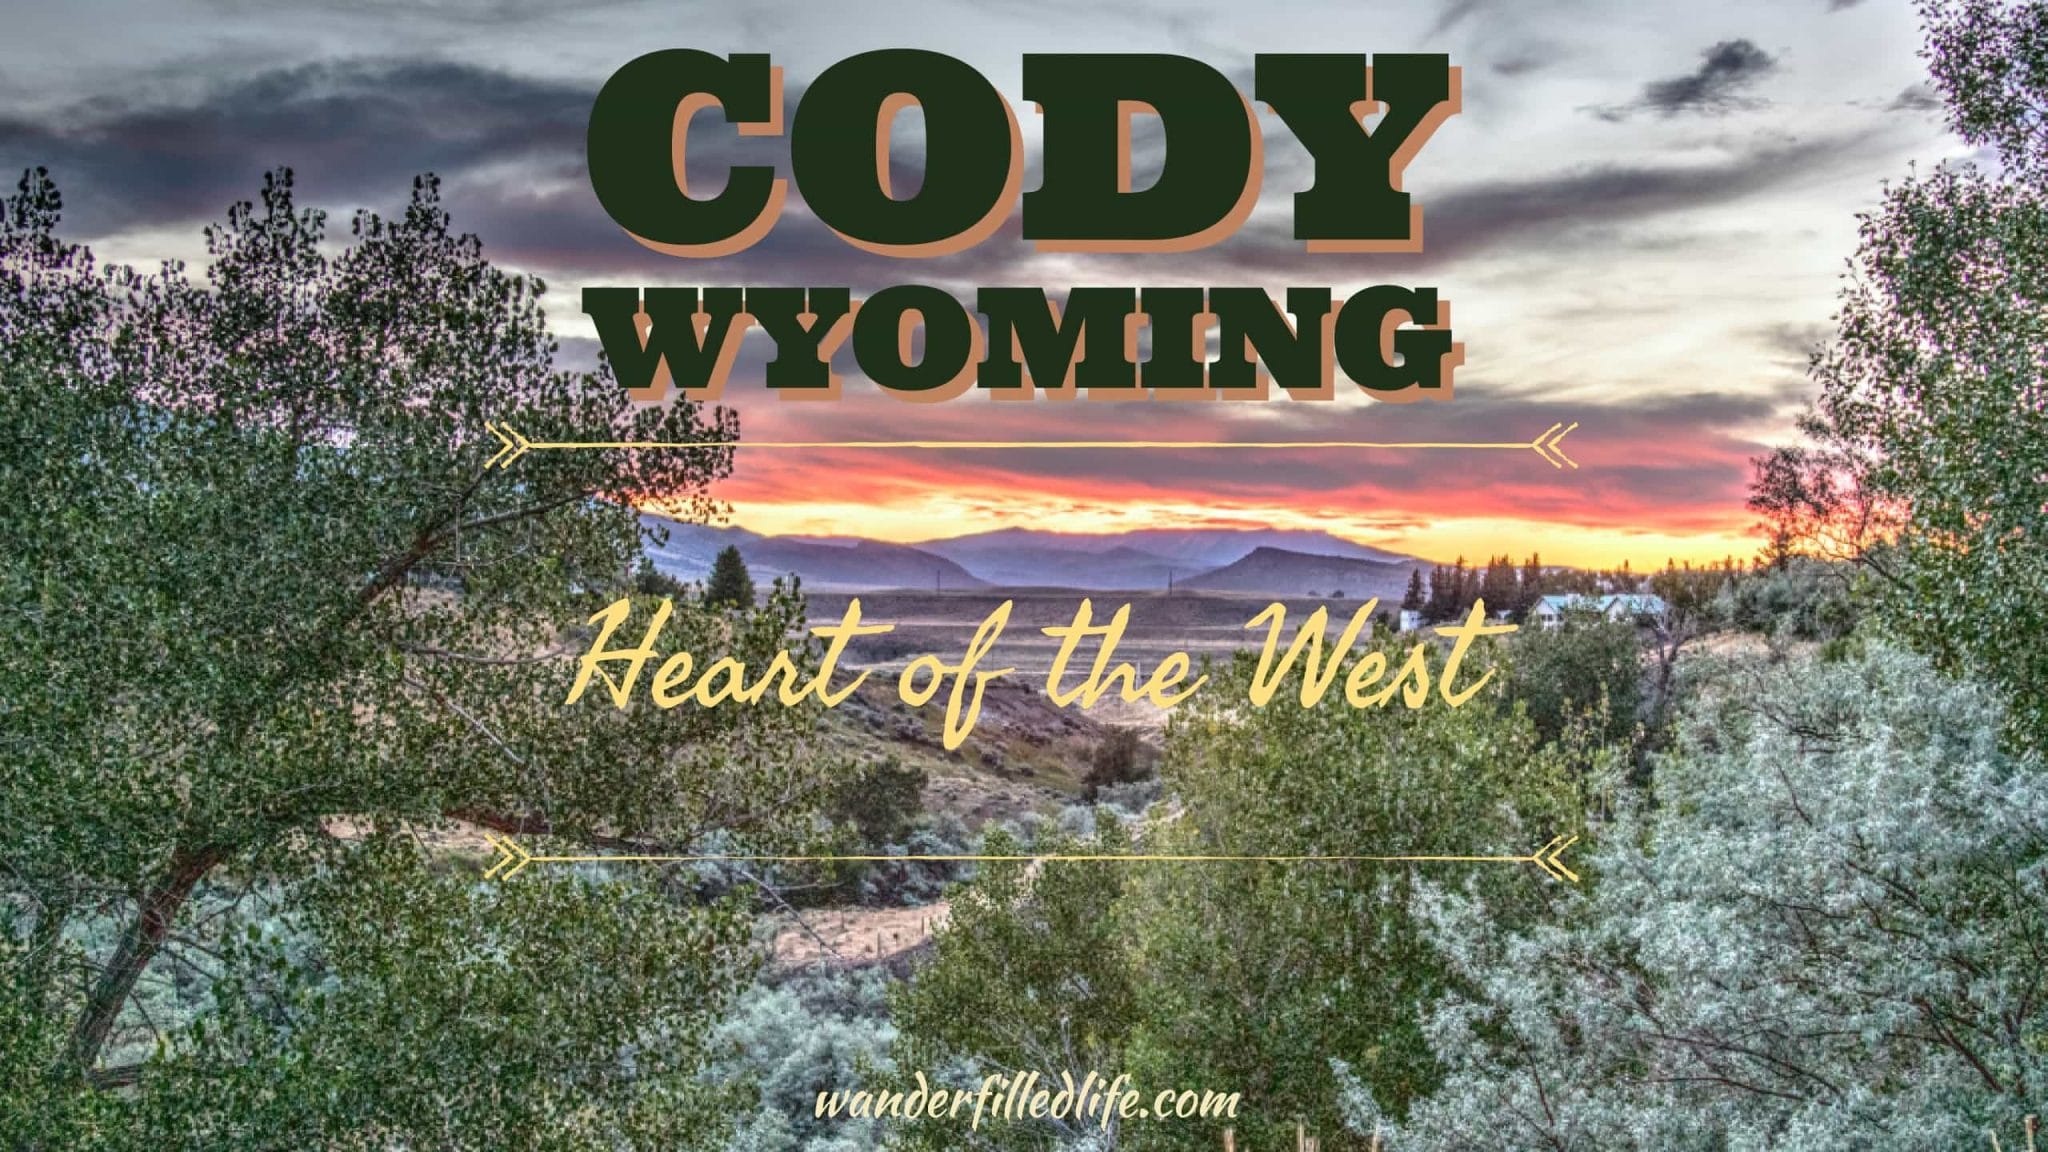 Cody, Wyoming - Heart of the West